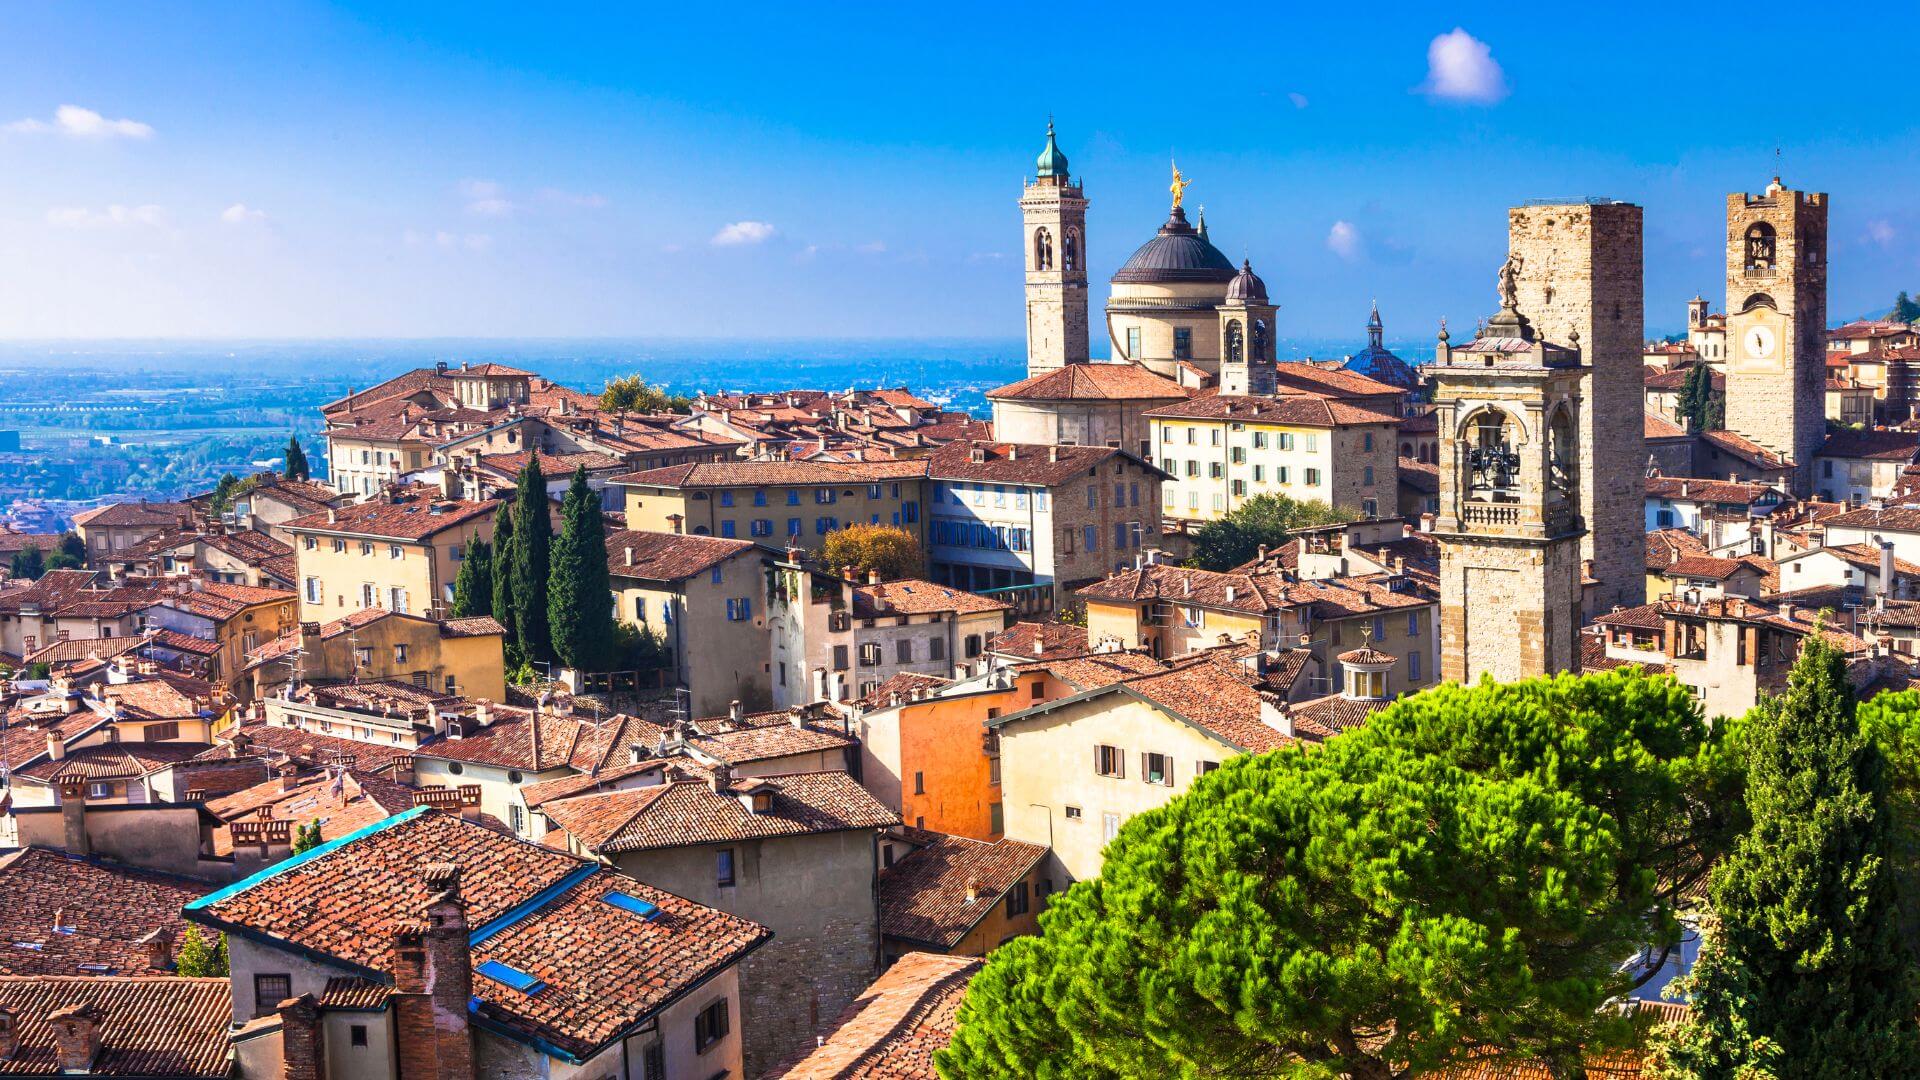 8 Italian Cities to consider for your next City Break